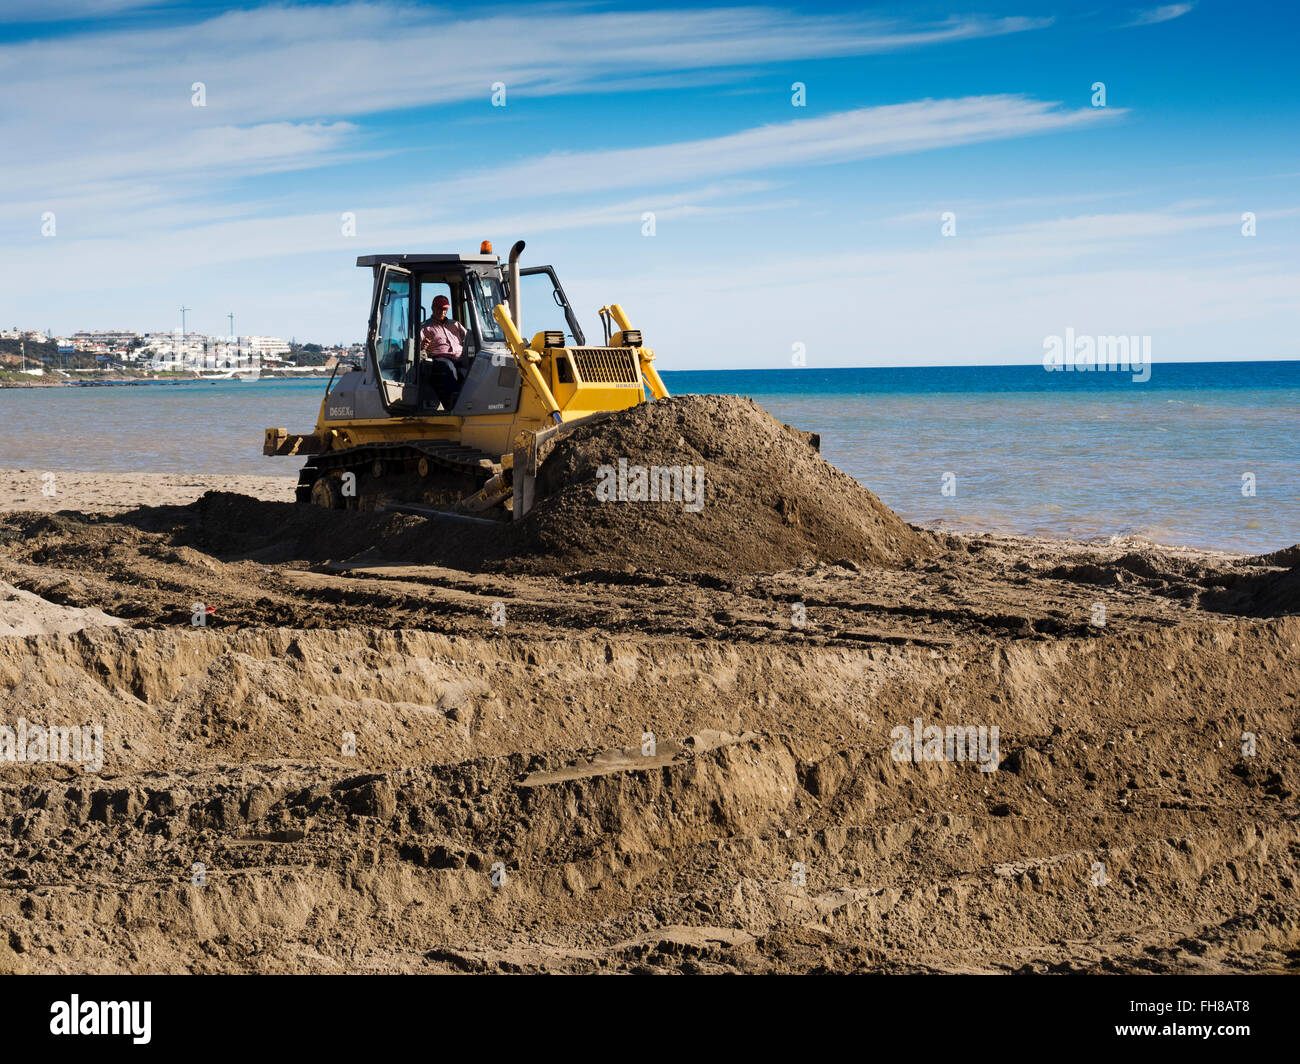 Bulldozer, Beach sand regeneration eroded by waves, Mijas Malaga province Costa del Sol. Andalusia southern Spain Stock Photo